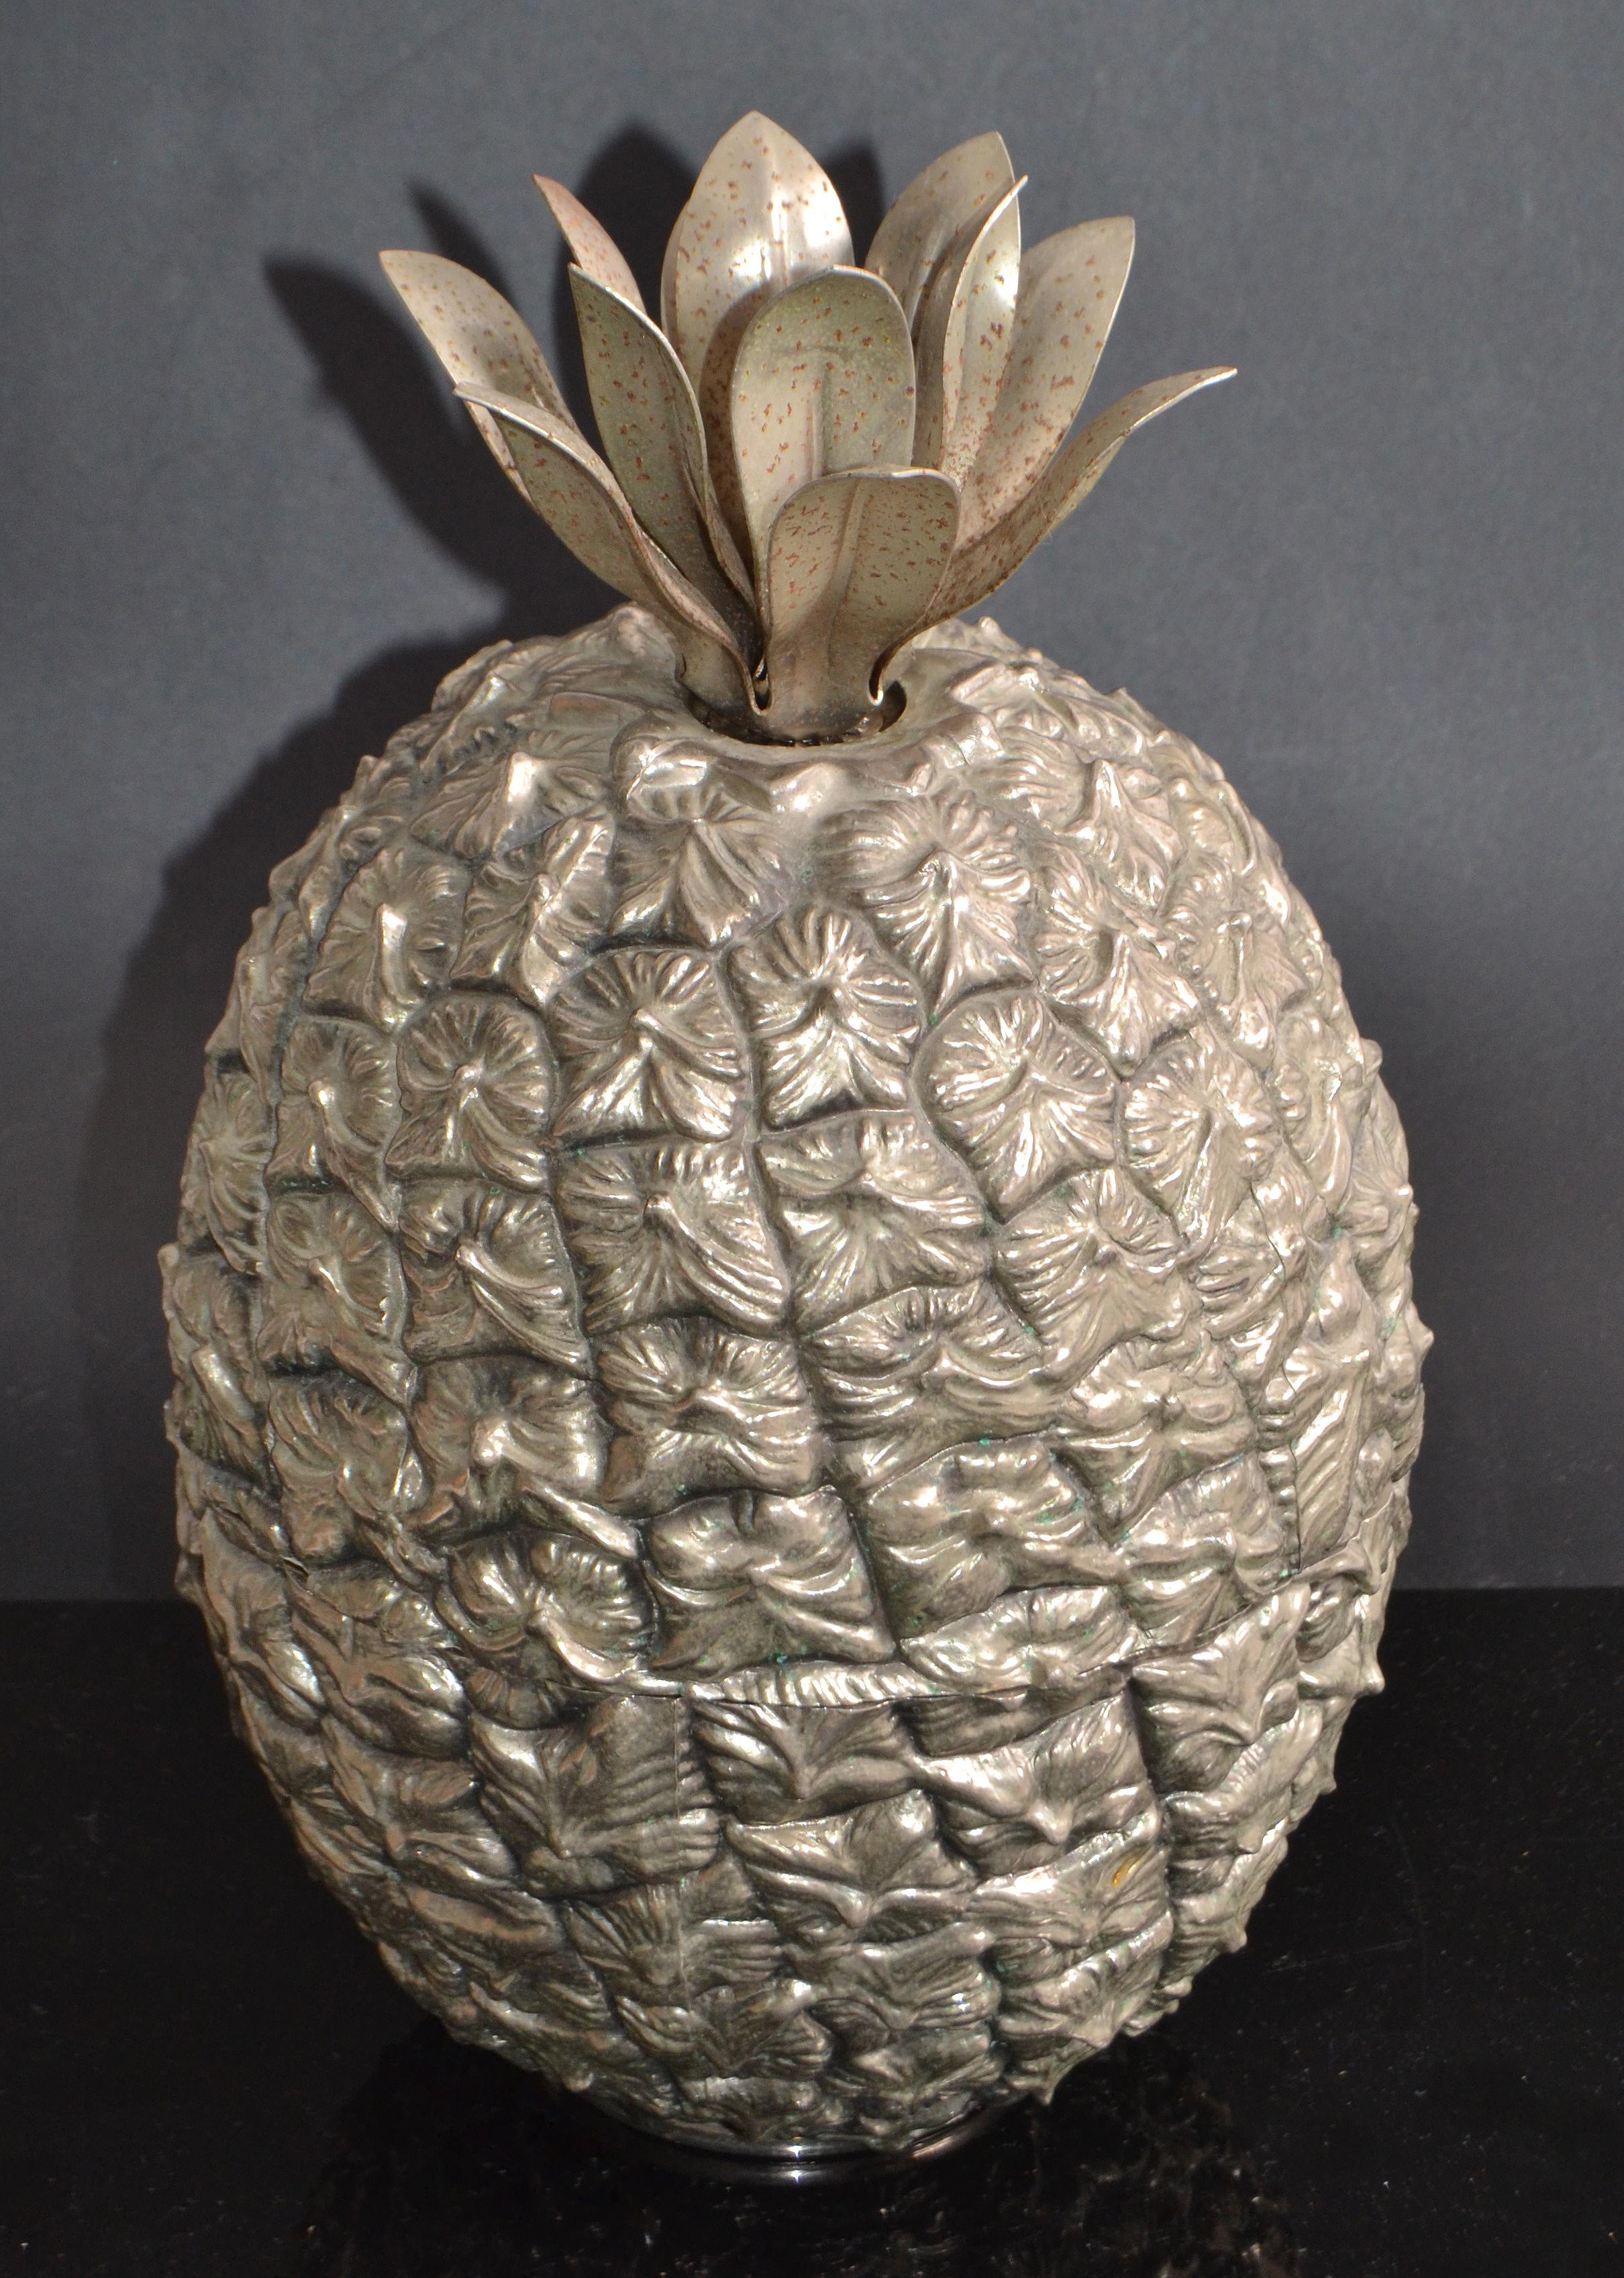 Superb ice bucket in the form of a pineapple, the silver plated over nickel body with removable lid complete with naturalistic foliage.
The insulation consisting of the original plastic cocoon.
Base is marked: Paris Made In France Model Depose